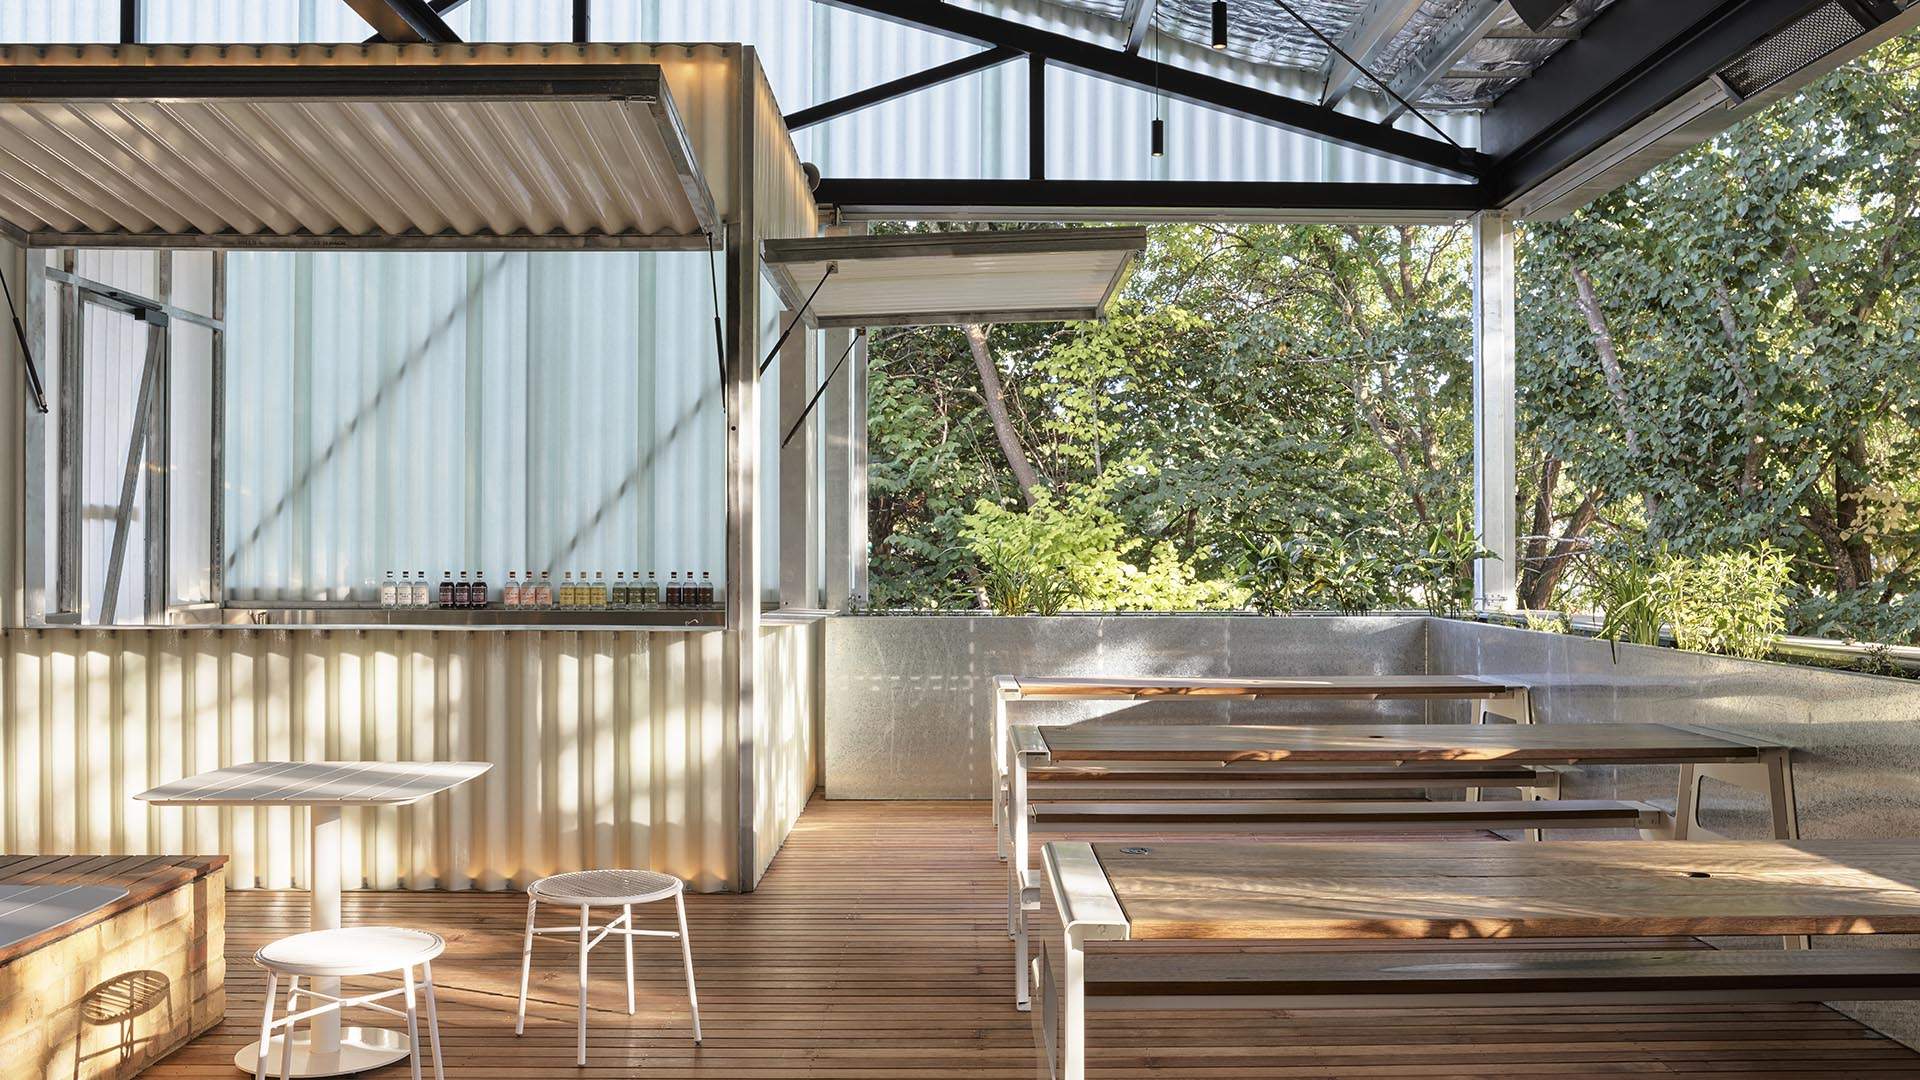 Now Open: Four Pillars Has Just Relaunched Its Healesville Distillery After a $7 Million Revamp